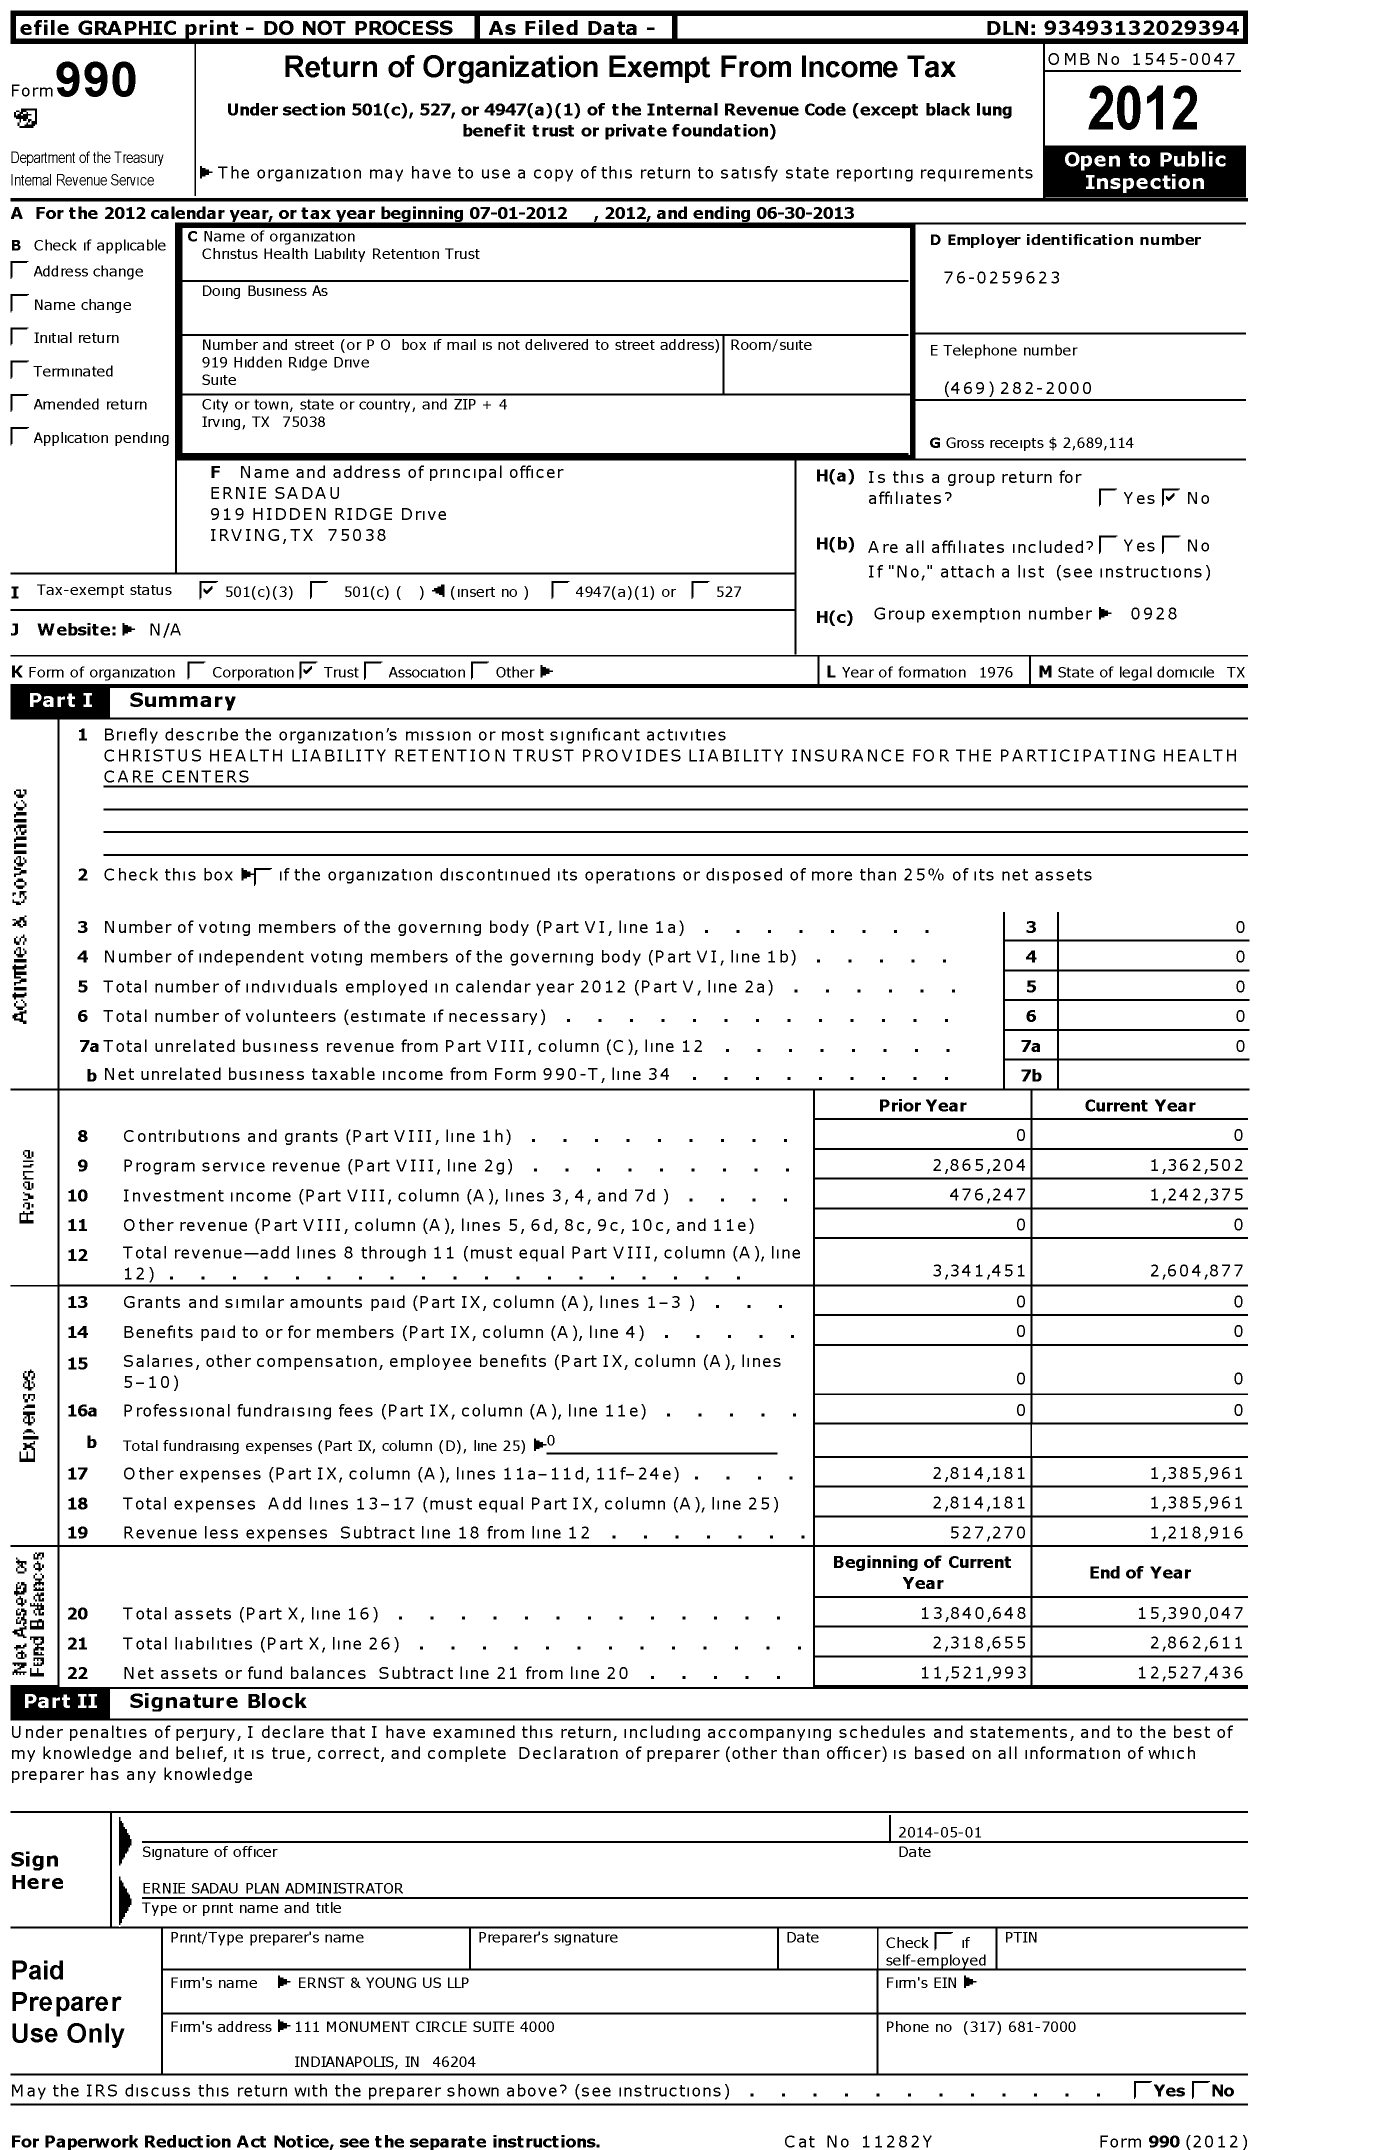 Image of first page of 2012 Form 990 for Christus Health Liability Retention Trust